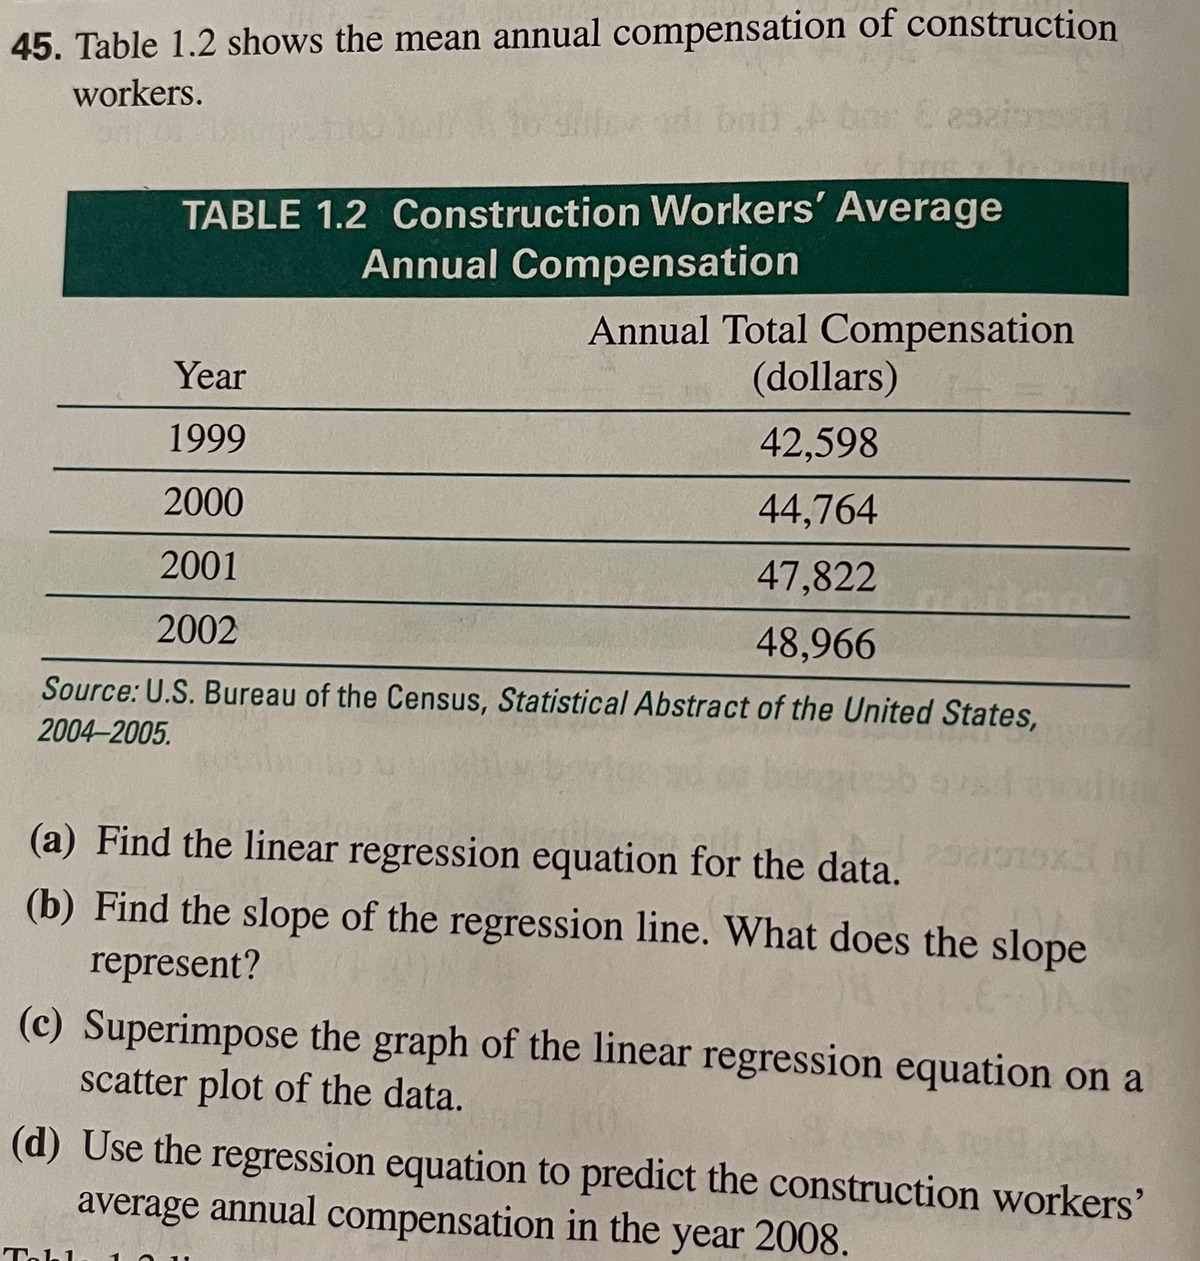 45. Table 1.2 shows the mean annual compensation of construction
workers.
bab Abor Cesaione
TABLE 1.2 Construction Workers' Average
Annual Compensation
Annual Total Compensation
(dollars)
Year
1999
42,598
2000
44,764
2001
47,822
2002
48,966
Source: U.S. Bureau of the Census, Statistical Abstract of the United States,
2004-2005.
(a) Find the linear regression equation for the data.
(b) Find the slope of the regression line. What does the slope
represent?
(c) Superimpose the graph of the linear regression equation on a
scatter plot of the data.
(d) Use the regression equation to predict the construction workers'
average annual compensation in the year 2008.
Tabl
